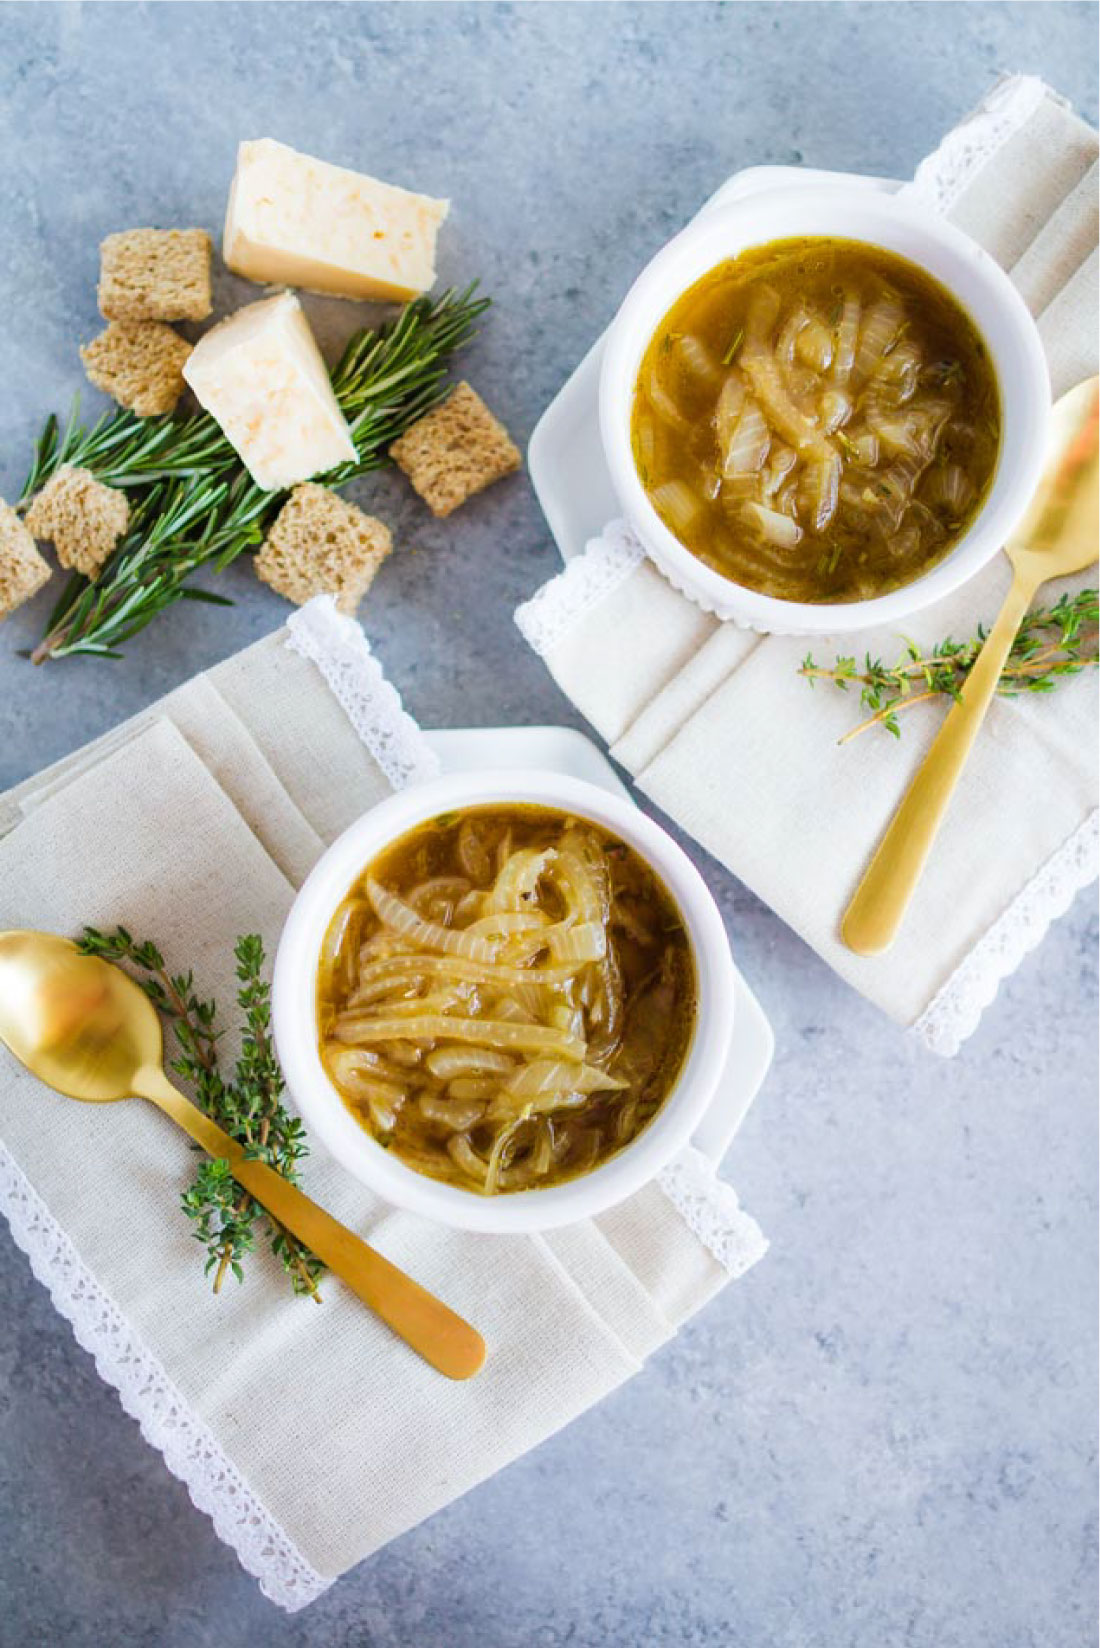 Lightened Up French Onion Soup - a delicious take on an old classic from Movara Fitness Resort via www.thirtyhandmadedays.com